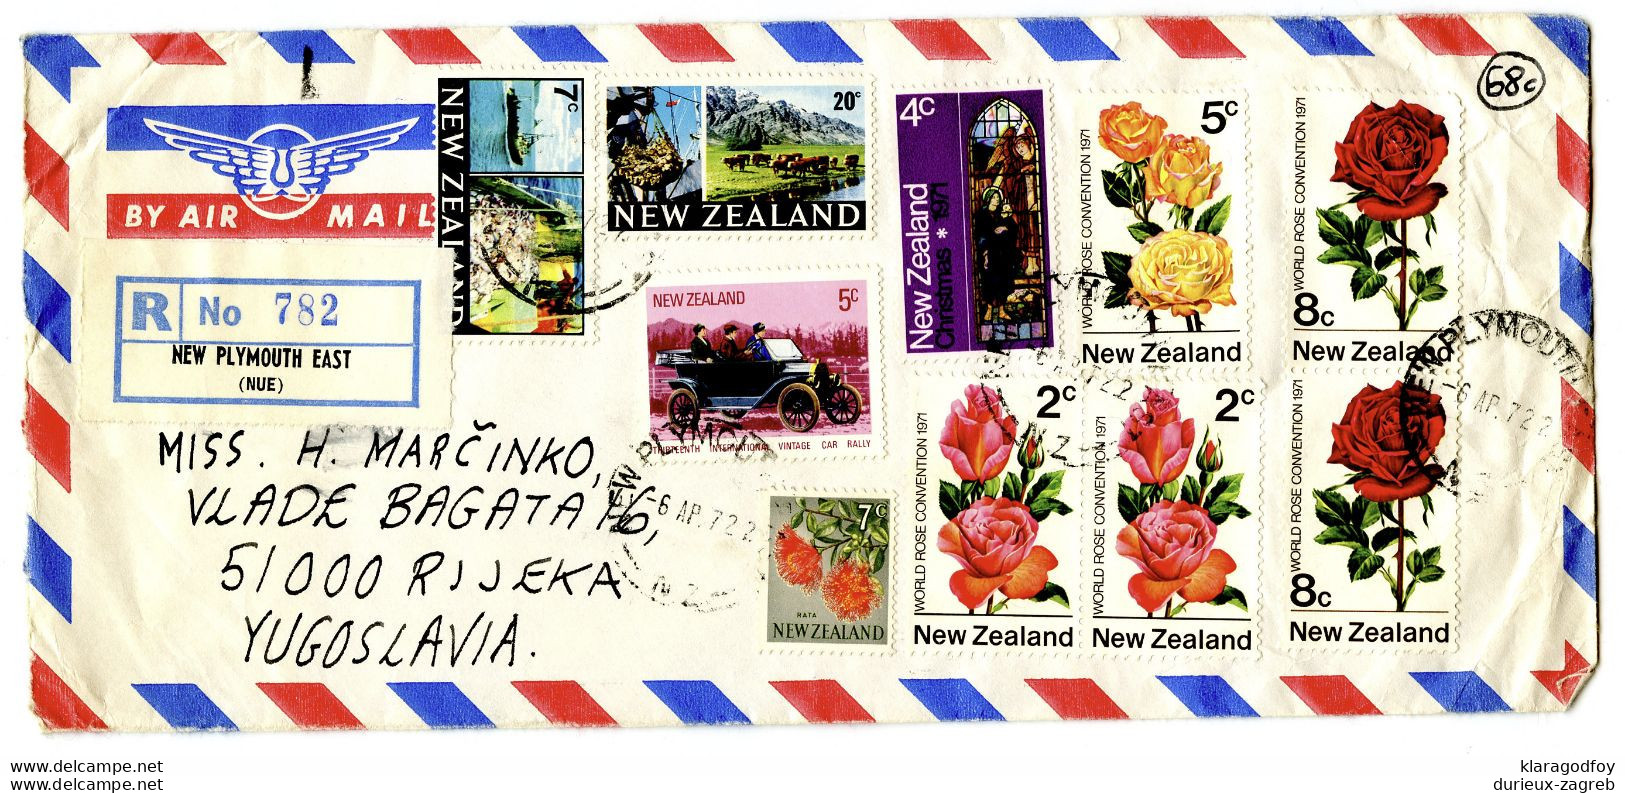 New Zealand Multifranked (roses) Air Mail Letter Cover Posted Registered 1972 New Plymouth Est Ot Rijeka B201101 - Covers & Documents